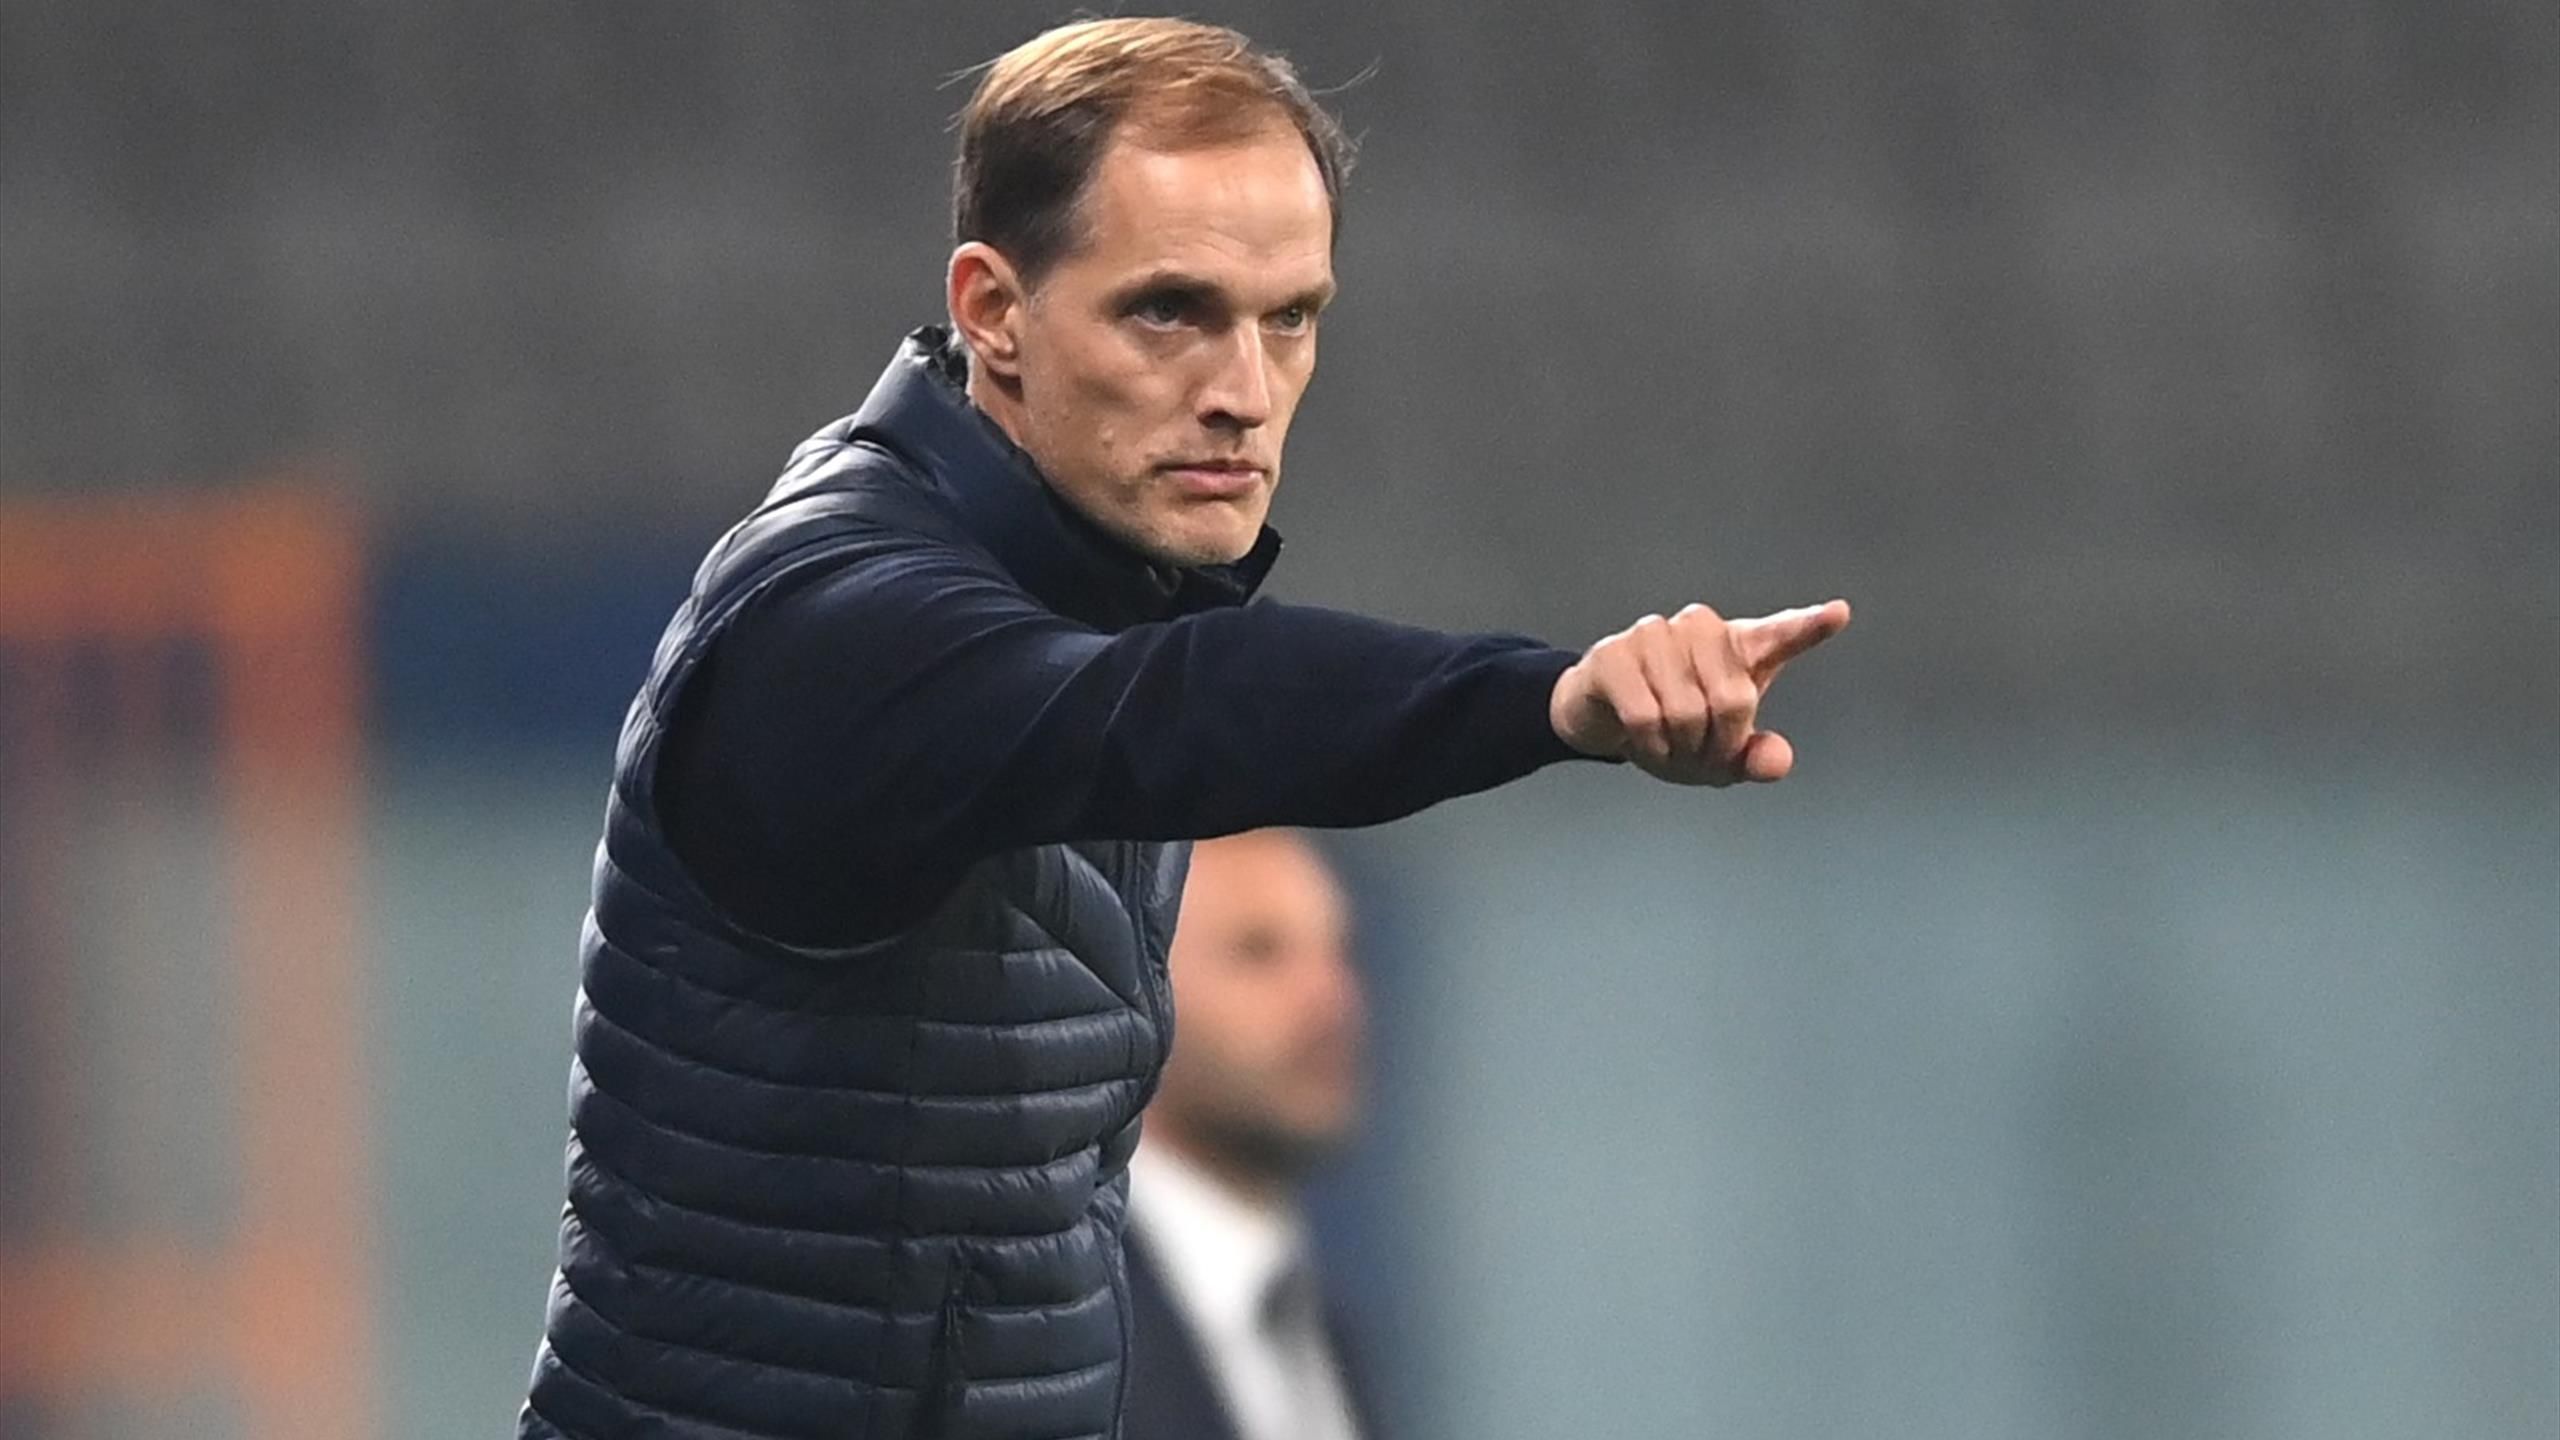  A photo of Thomas Tuchel in a suit, gesturing with his right hand.